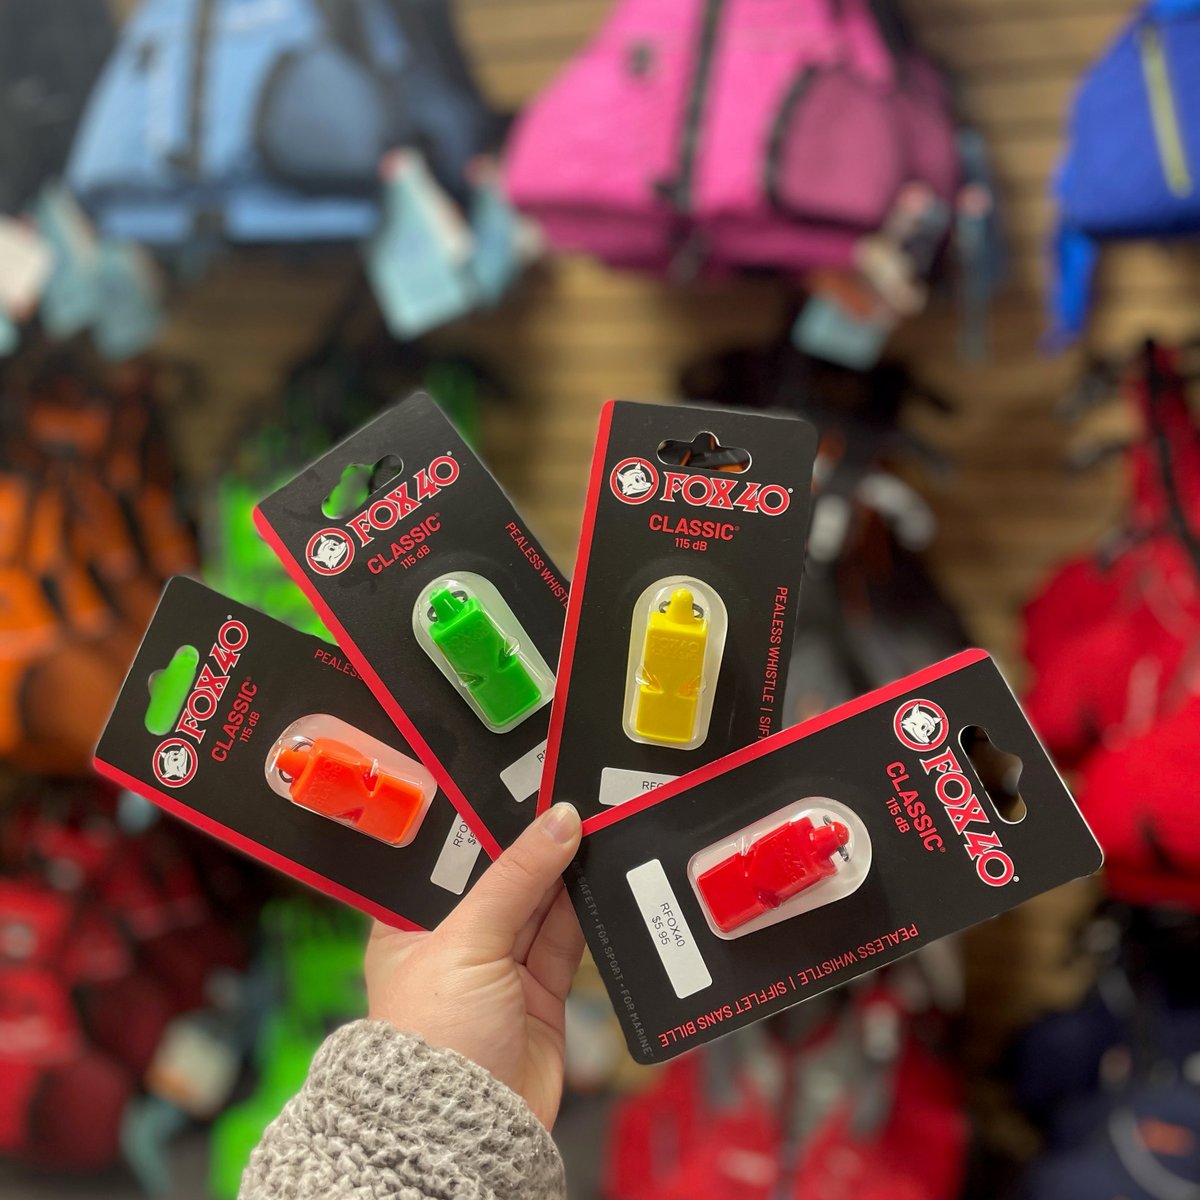 Fox 40 classic safety whistles come in a variety of colors to match your favorite PFD. A good pealess whistle is an essential paddling safety item. They can be heard over ambient noise, waves & wind. Only $5.95! Available online & in-store. #safety #canoeing #kayaking #ldnont